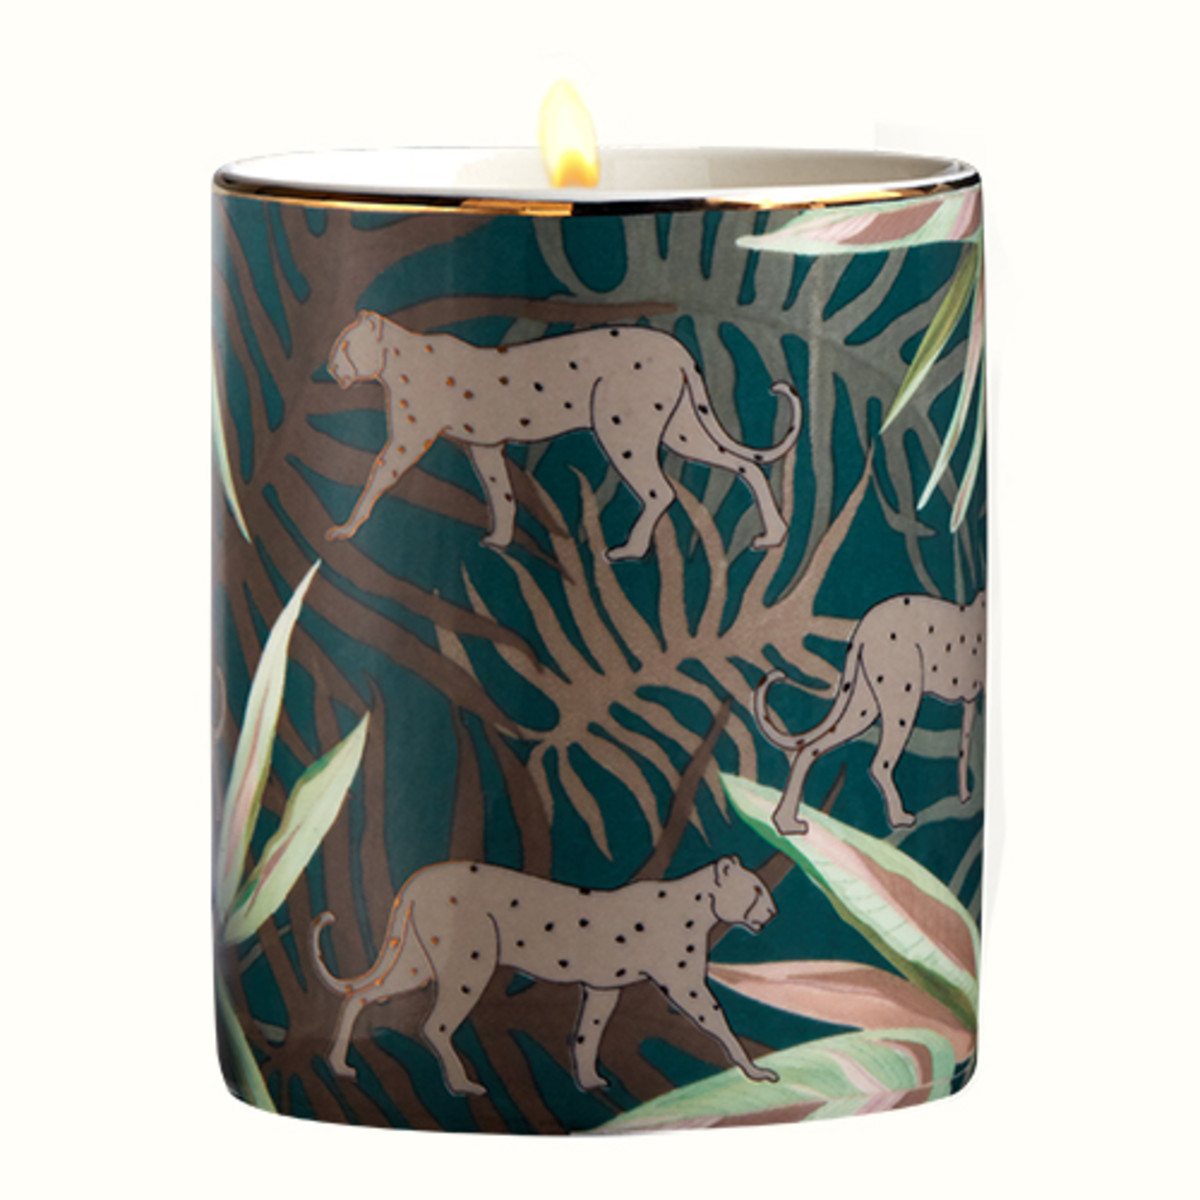 L'or de Seraphine's Ares Candle is housed in a ceramic vessel designed with golden cheetahs atop a green leaf pattern. 